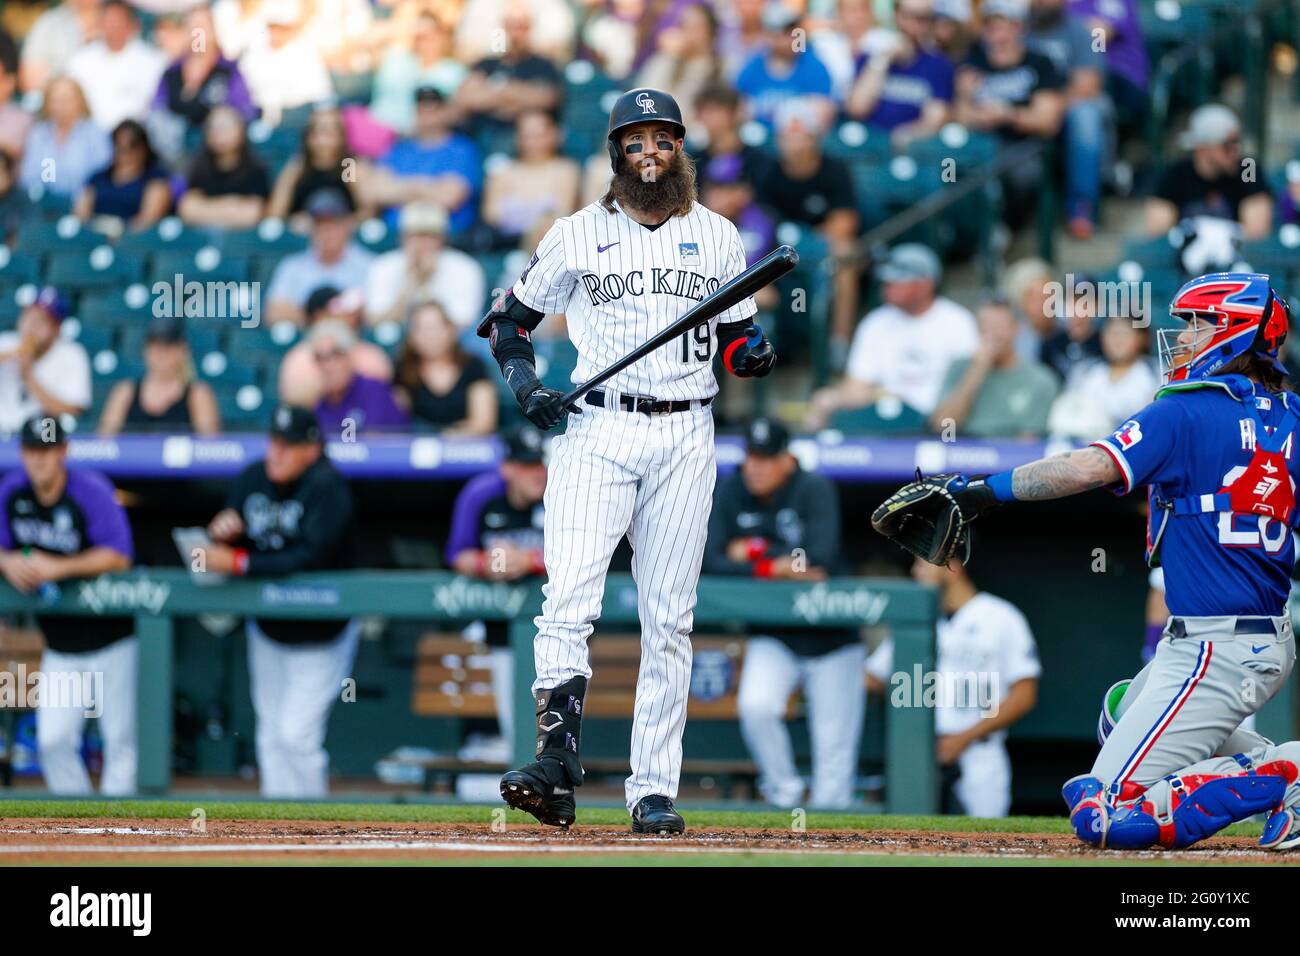 Colorado Rockies outfielder Charlie Blackmon during an MLB regular season game against the Texas Rangers, Wednesday, June 2nd, 2021, in Denver. (Brand Stock Photo